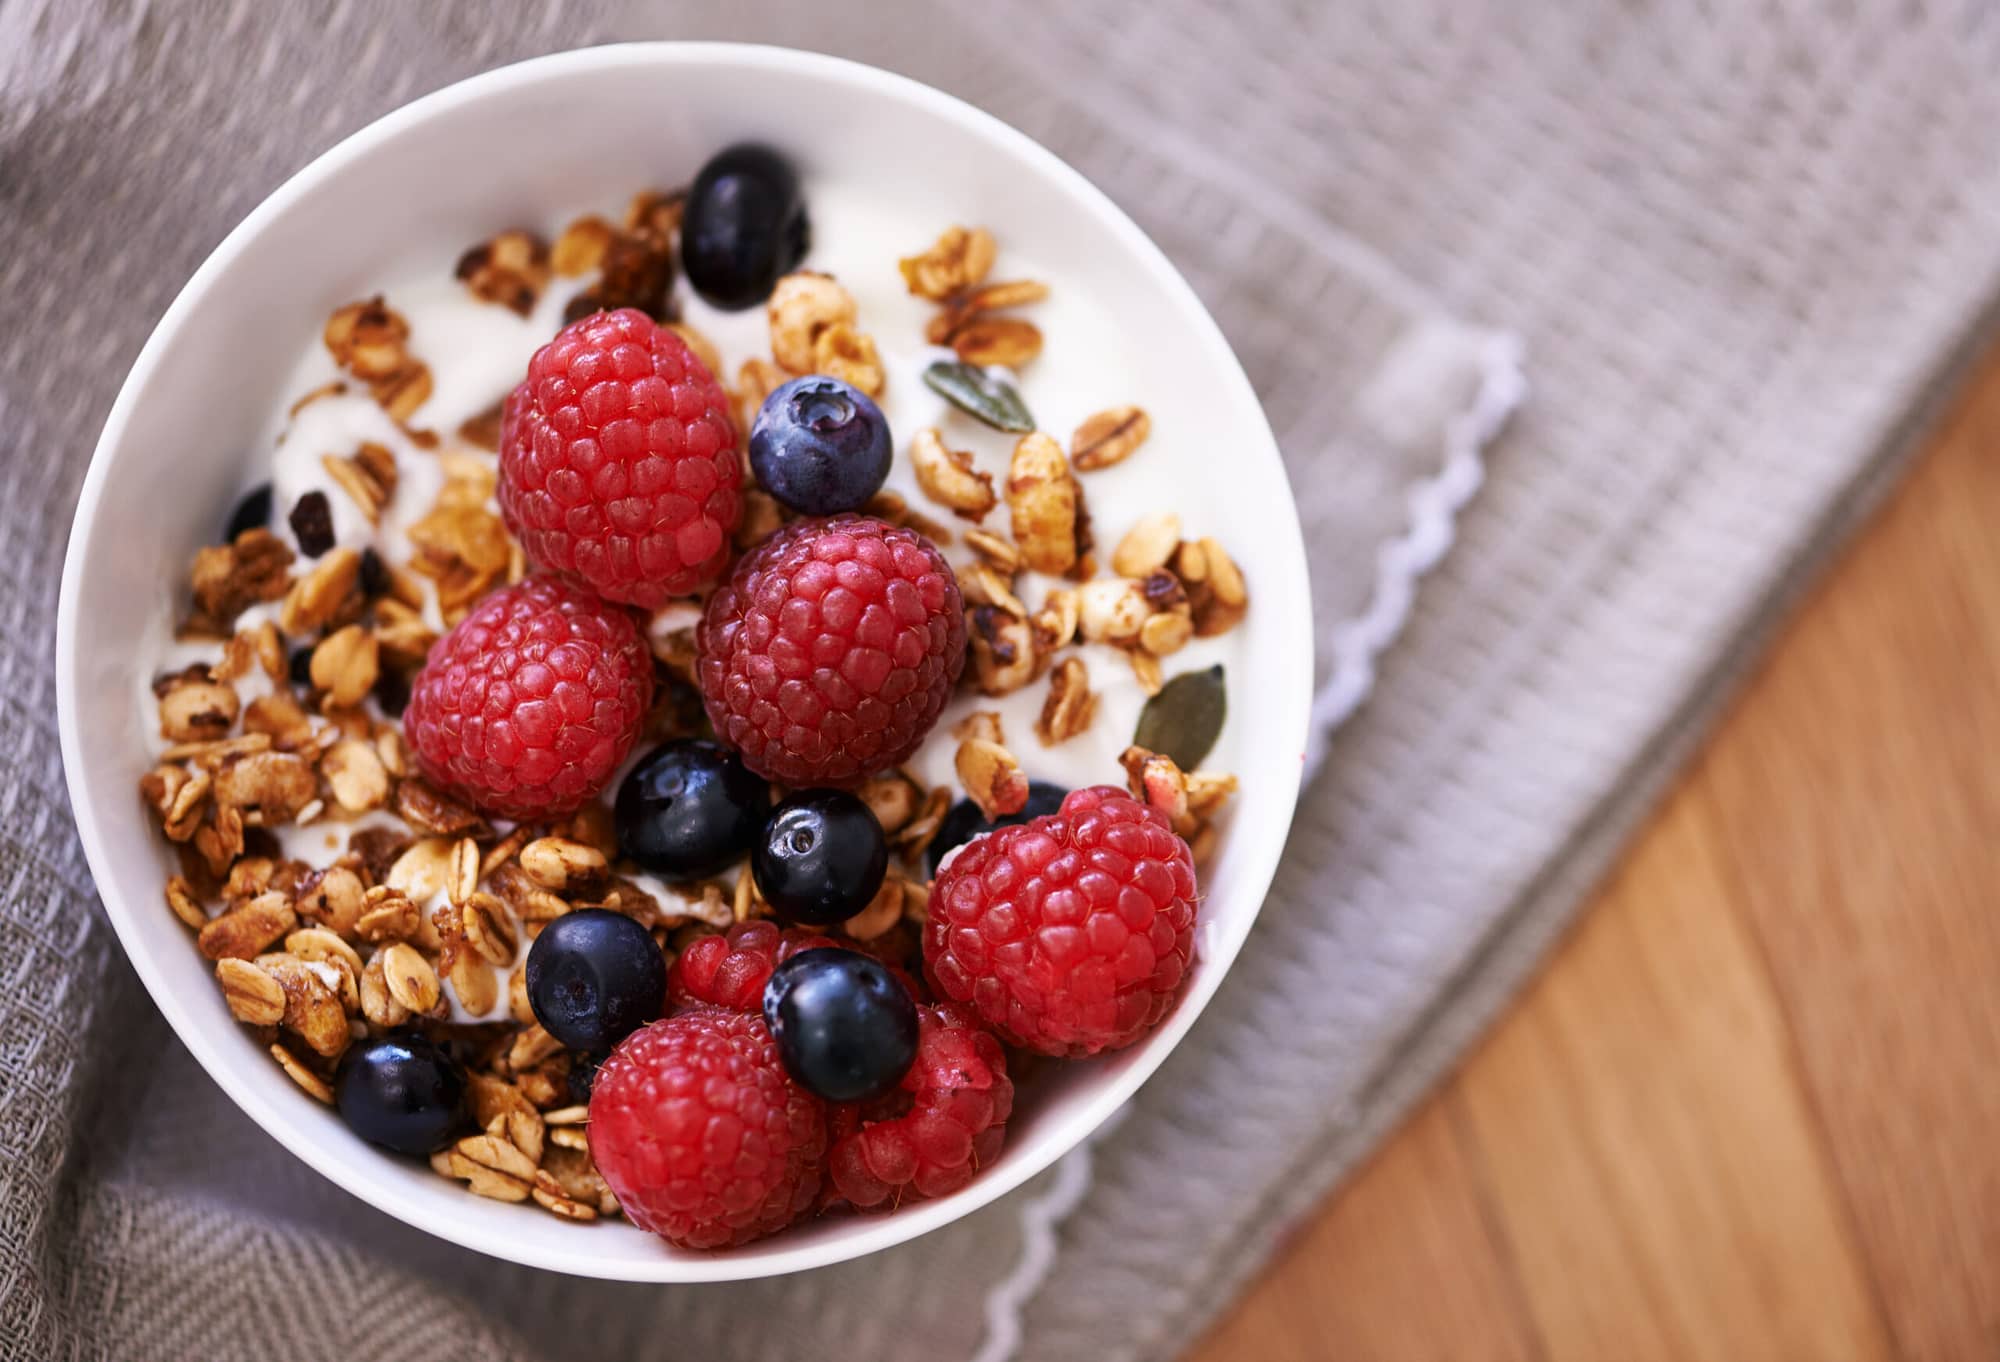 Yogurt with granola and berries is a great example of a healthy and quick breakfast.